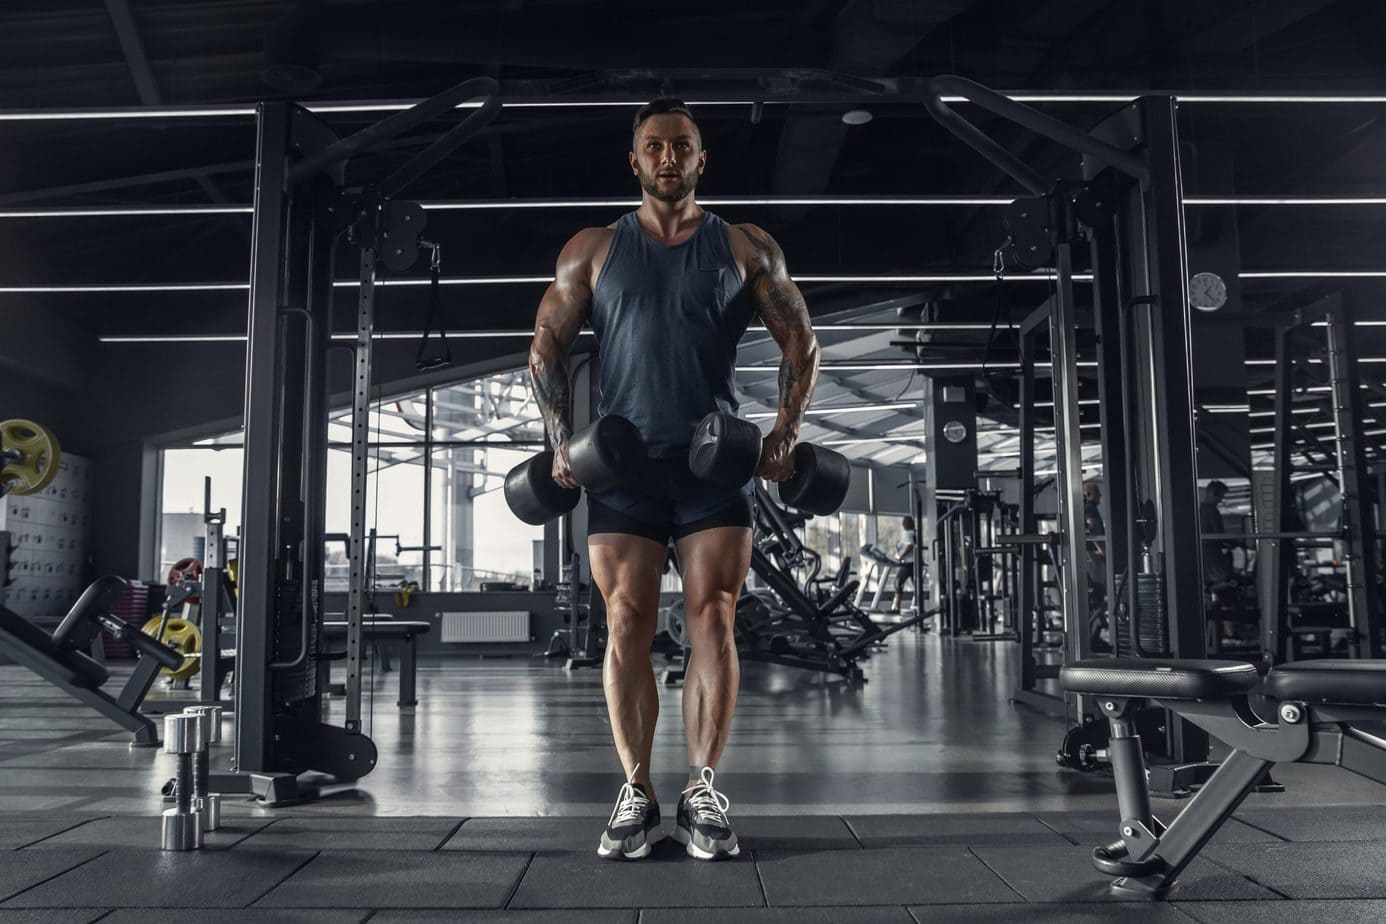 How long should an optimal gym workout be?